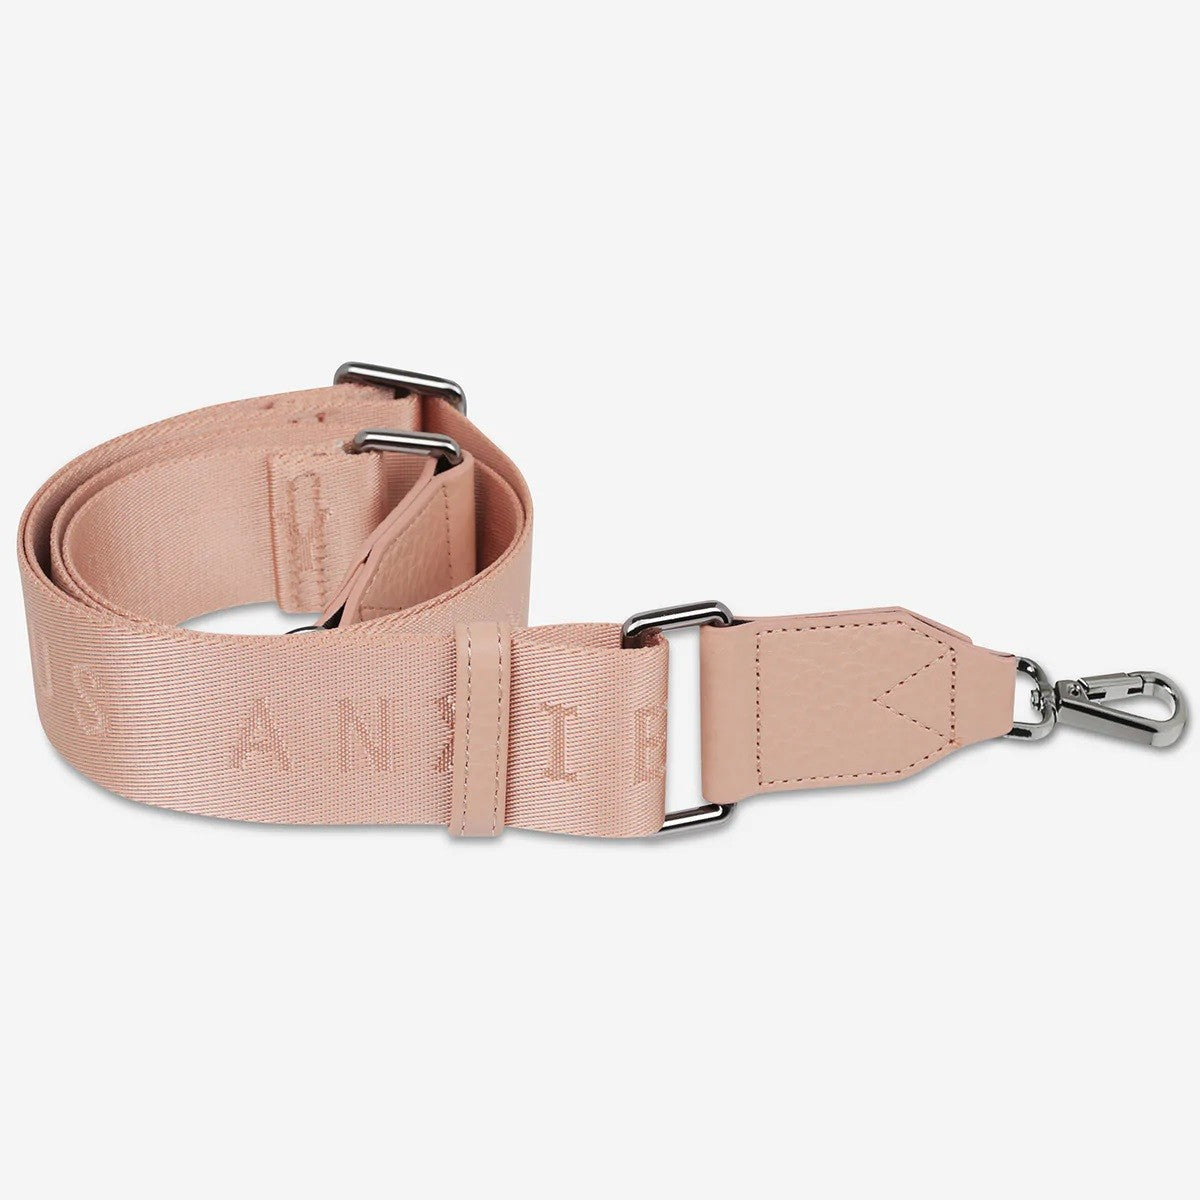 Status Anxiety Without You Strap [COLOUR:Dusty pink]